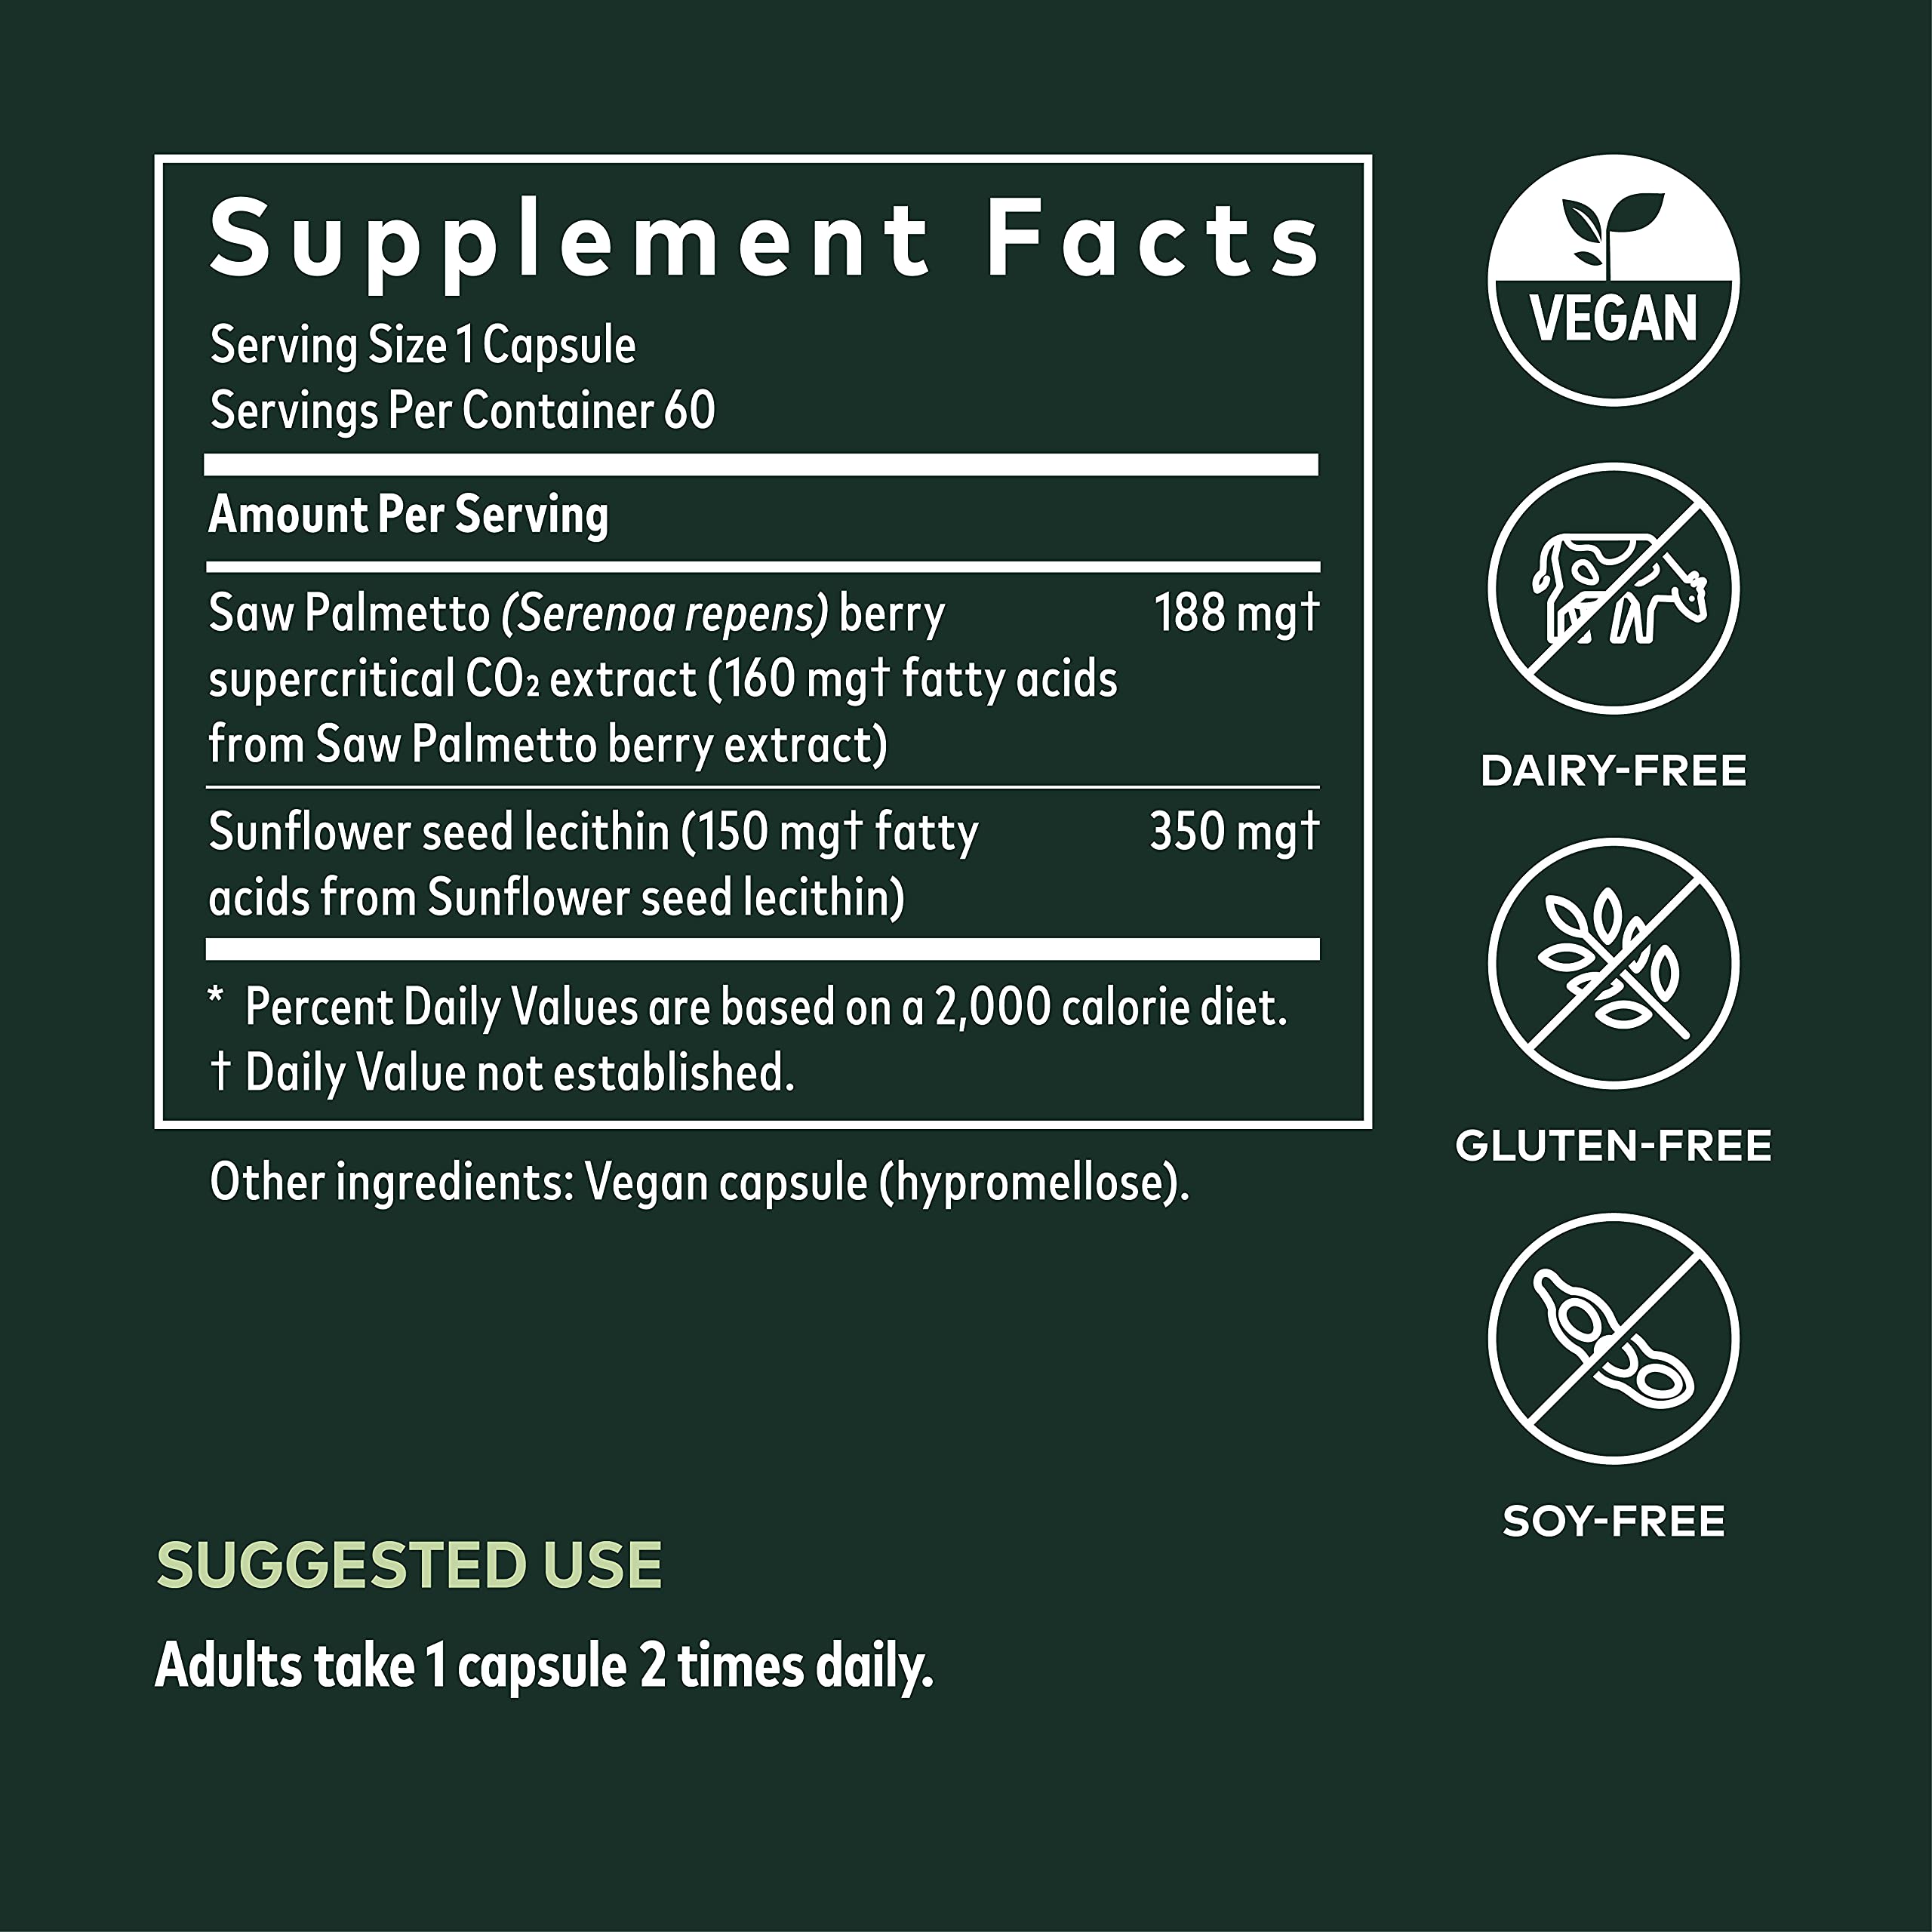 Gaia Herbs Saw Palmetto - Supports Healthy Prostate Function for Men - Contains Saw Palmetto and Sunflower Seed Lecithin to Support Men’s Health - 60 Vegan Liquid Phyto-Capsules (30-Day Supply)